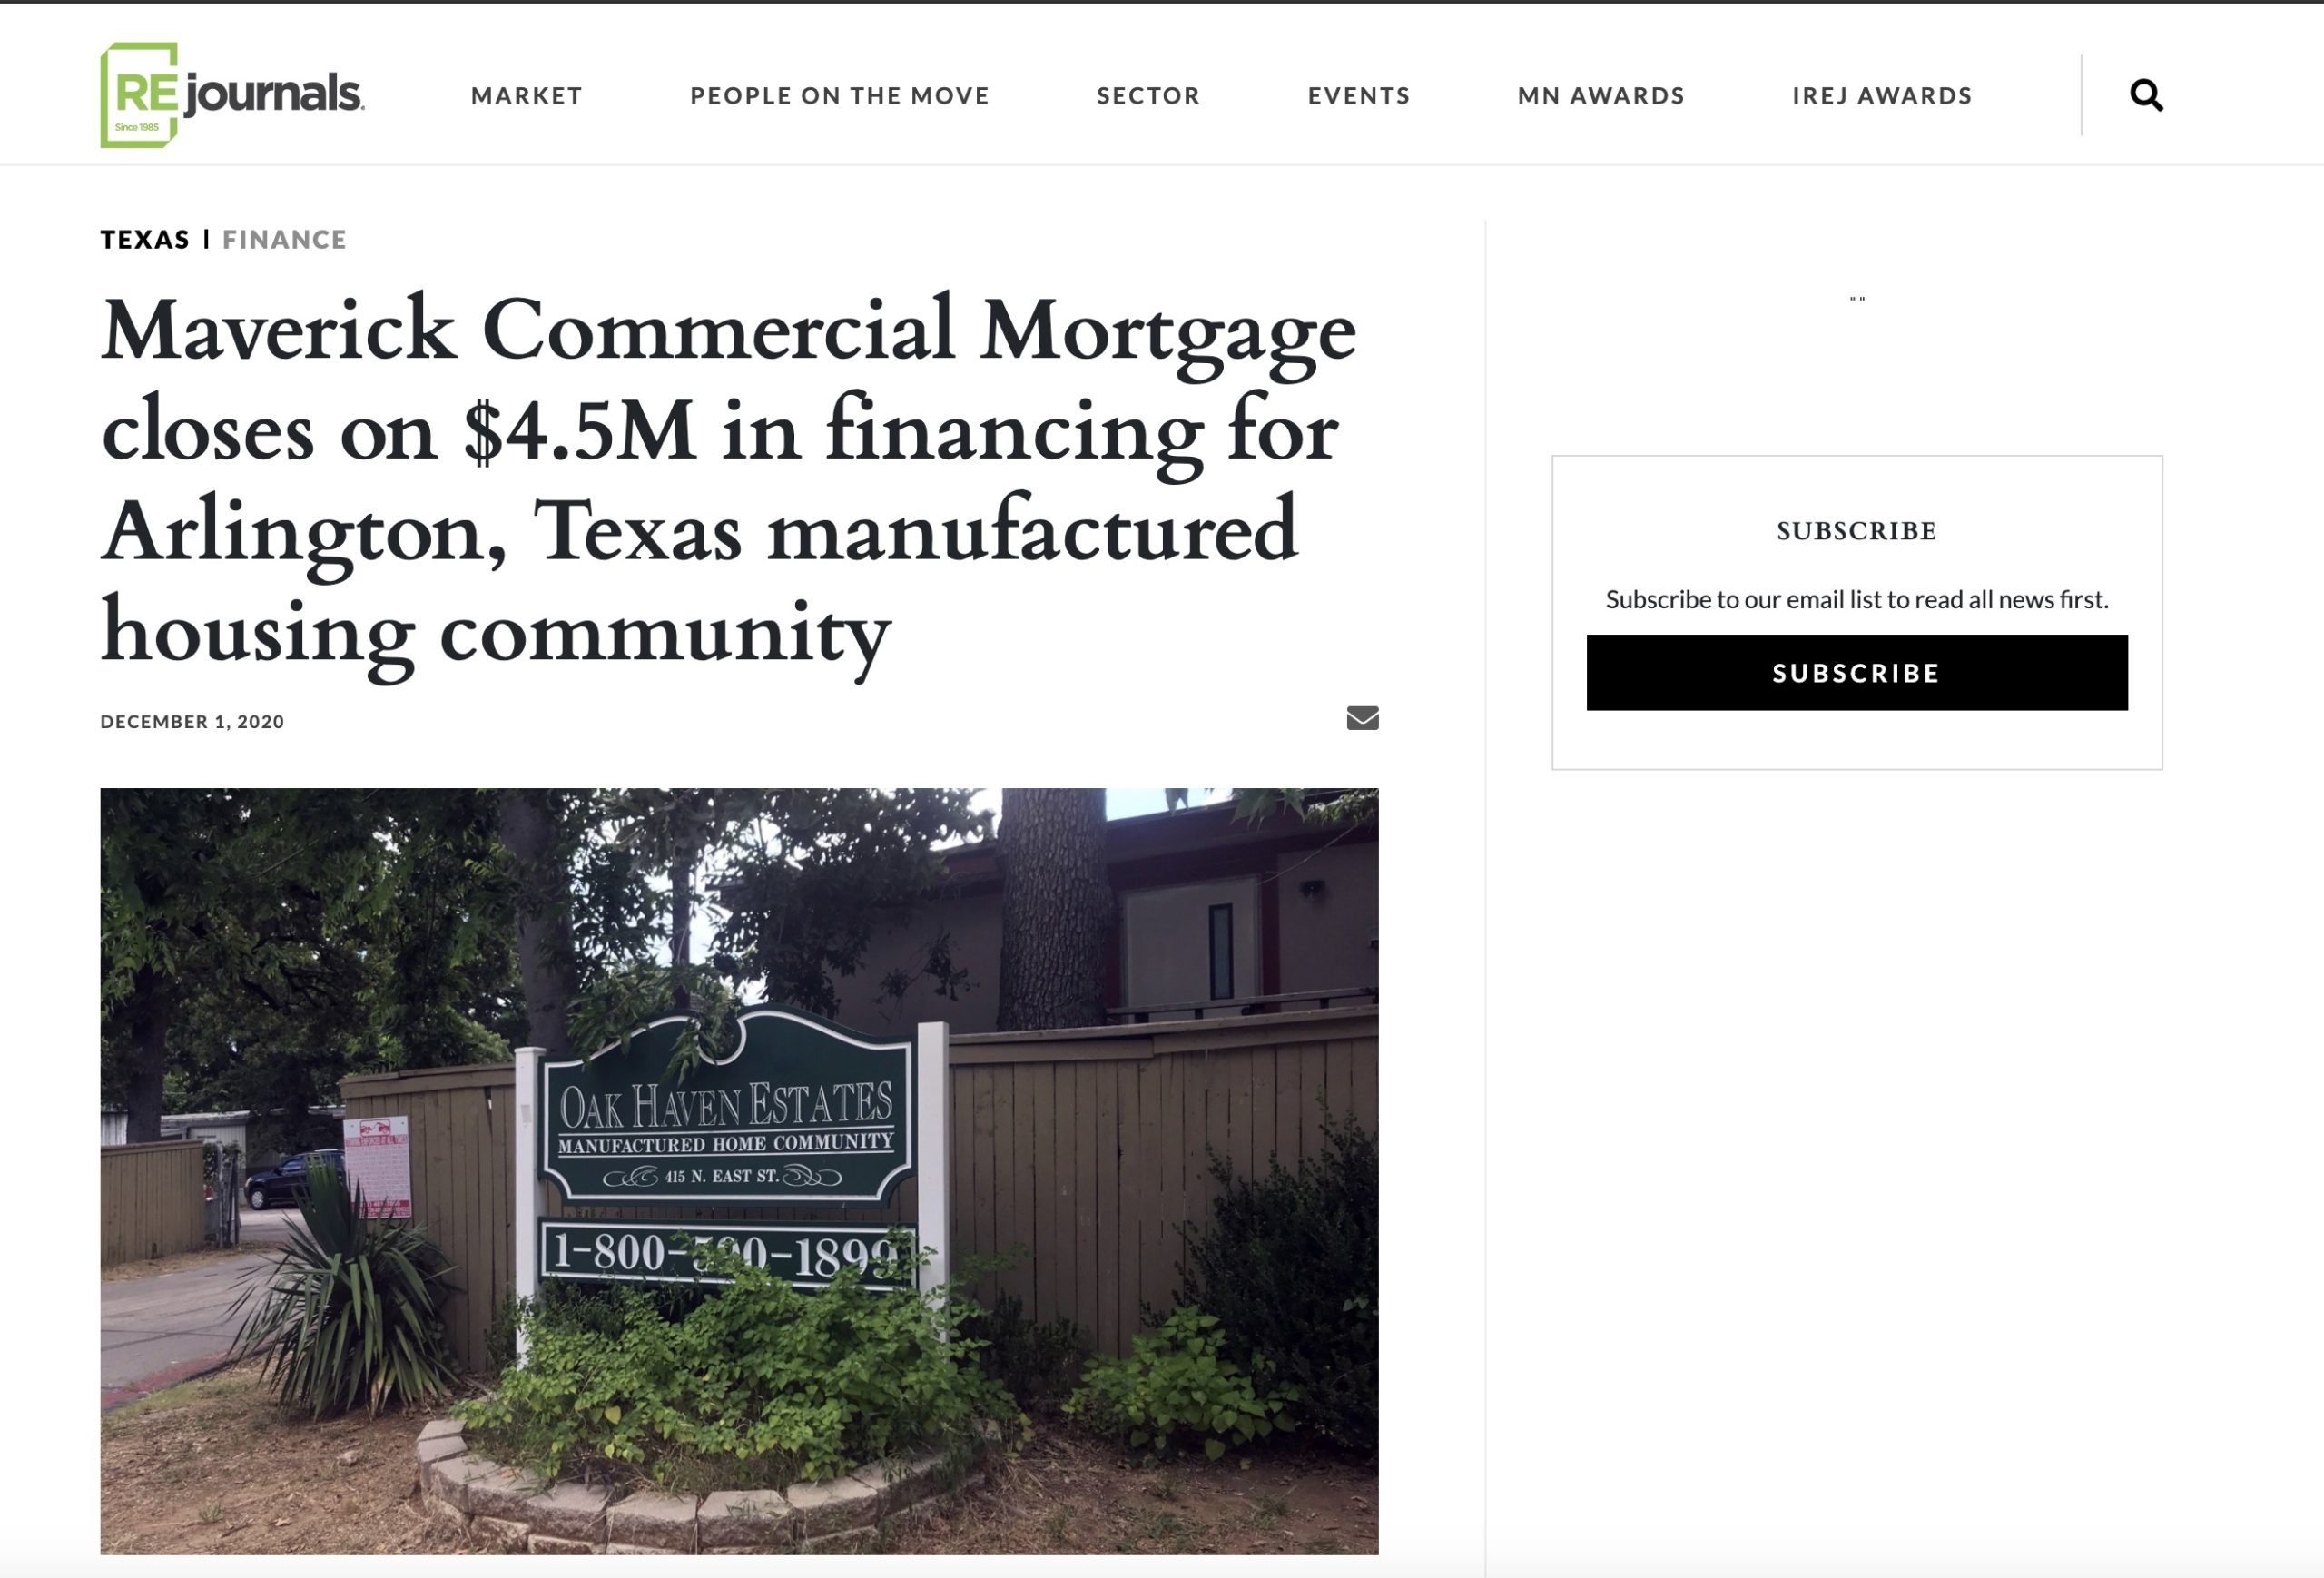 Maverick Commercial Mortgage closes on $4.5M in financing for Arlington, Texas manufactured housing community